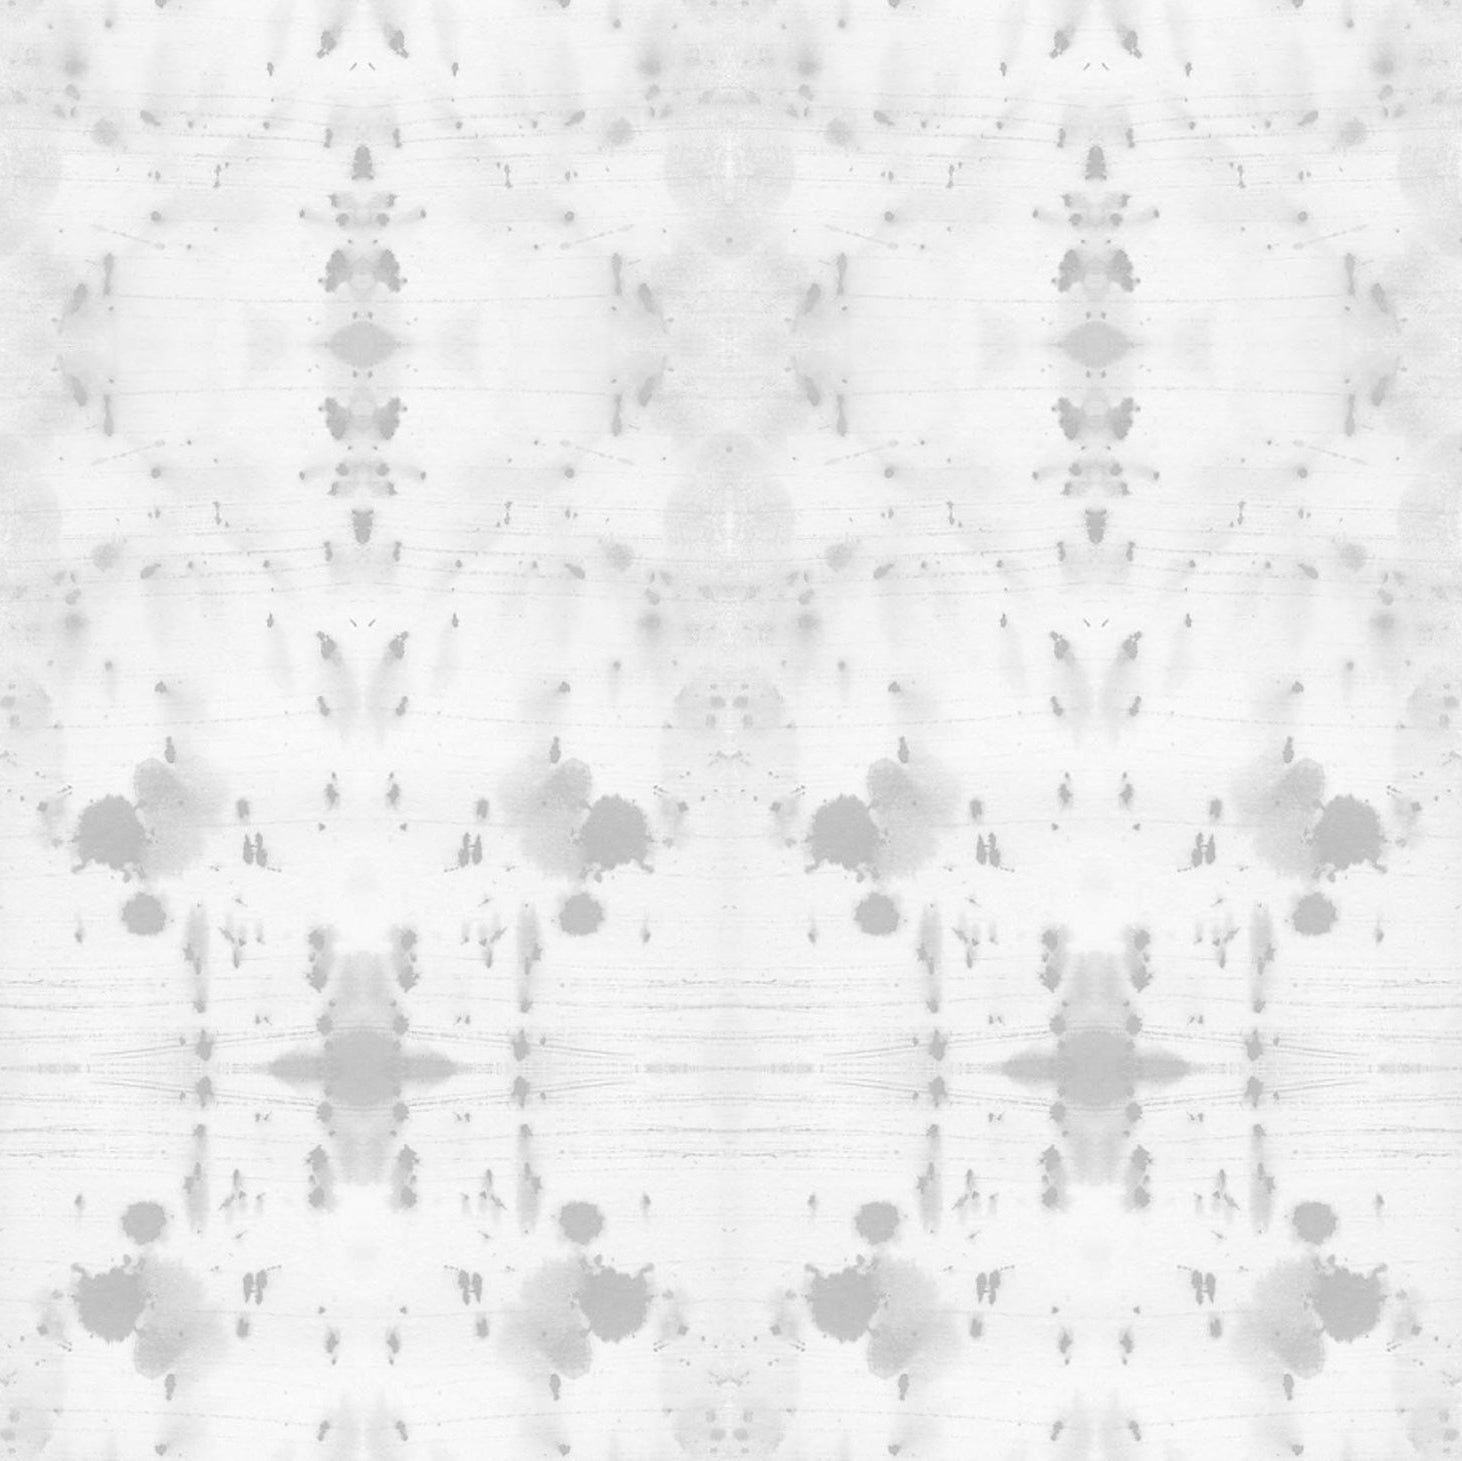 Detail of wallpaper in an abstract ink blot print in gray on a white field.